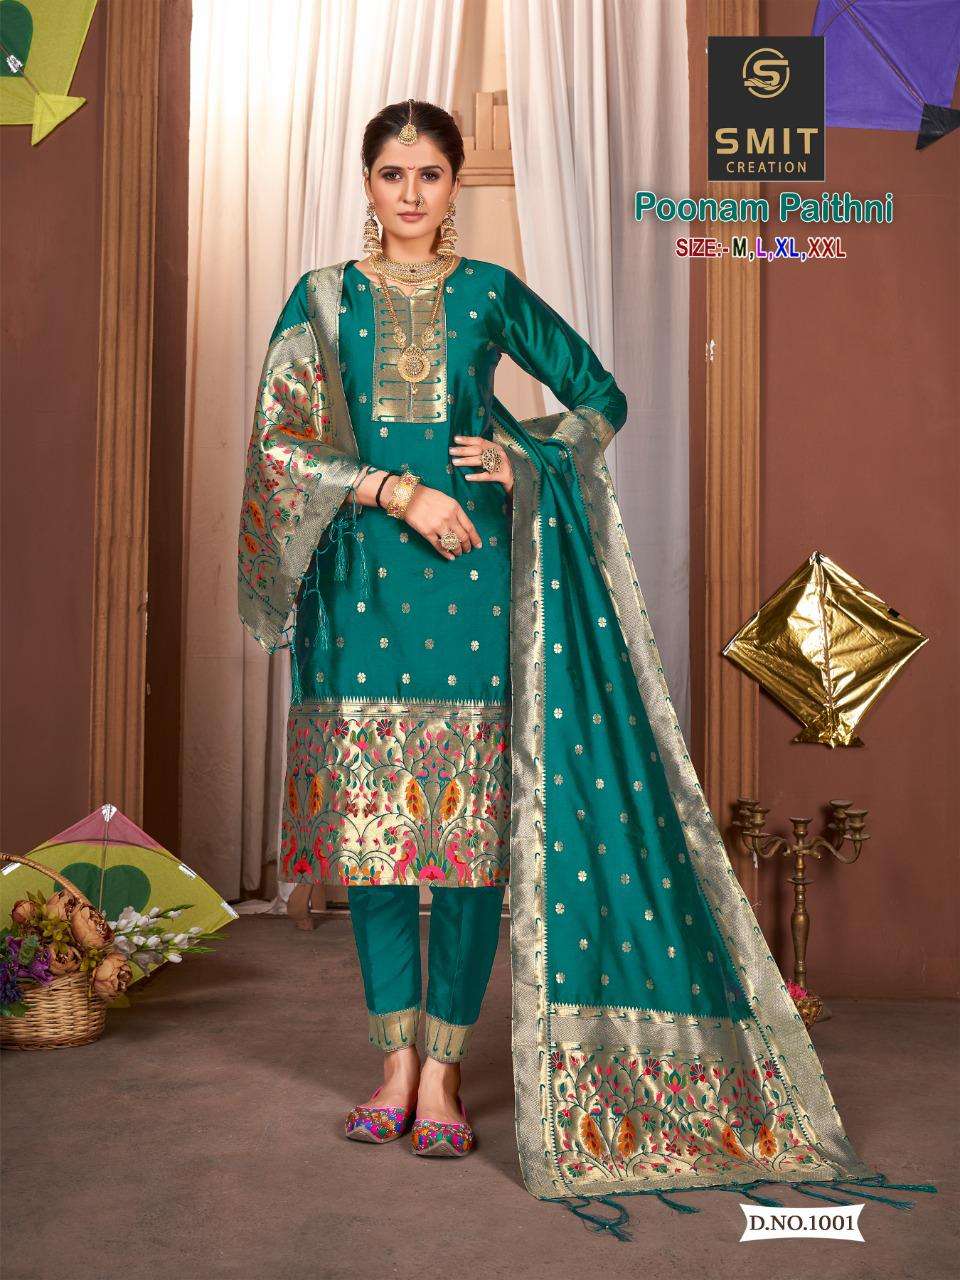 smit creation poonam paithni 1001-1006 series top bottom with dupatta suits new catalogue